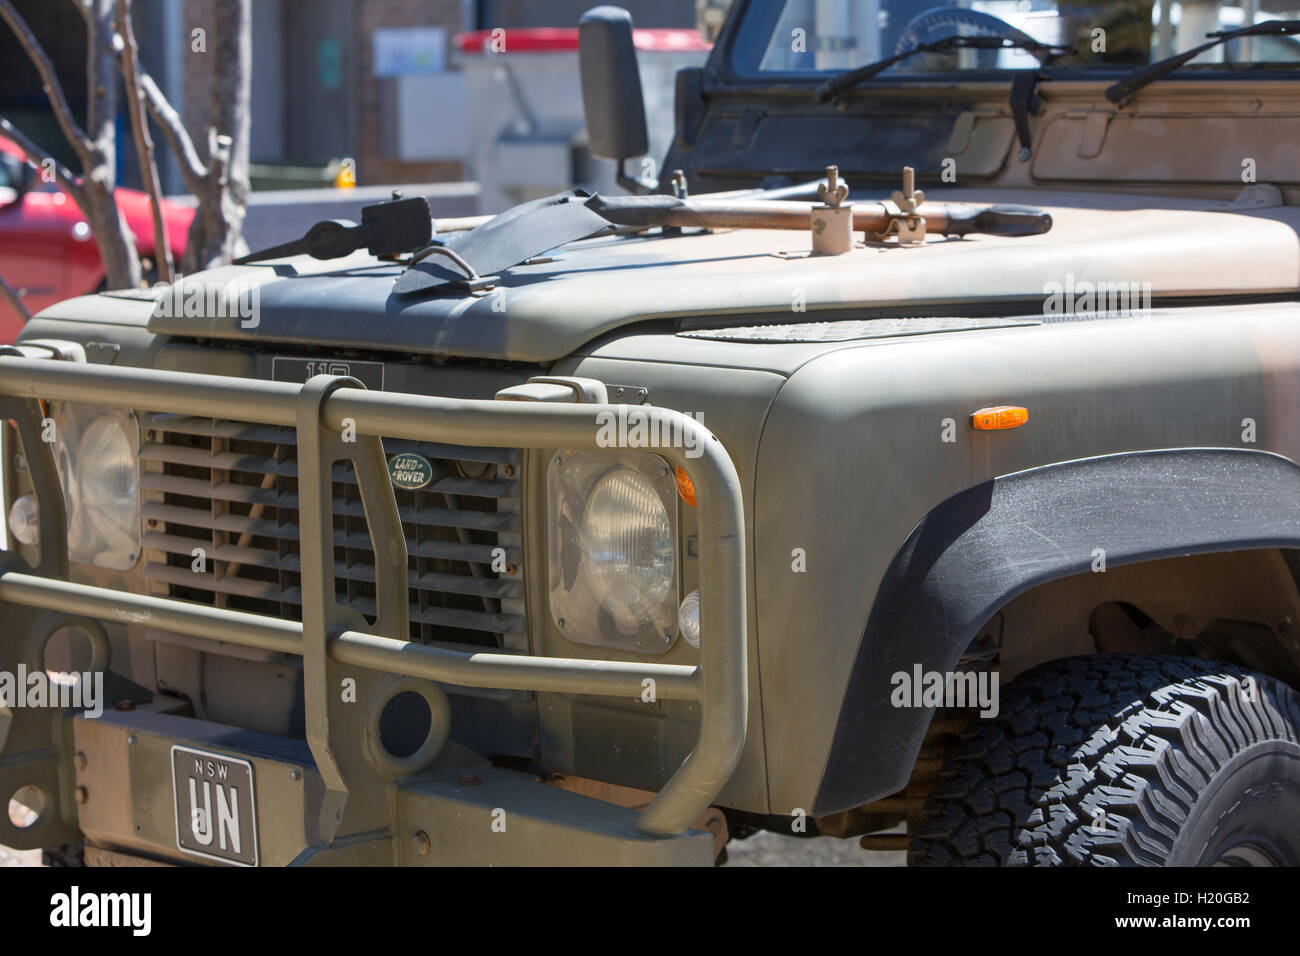 Land rover defender in camouflage army colours,parked in Sydney,australia Stock Photo